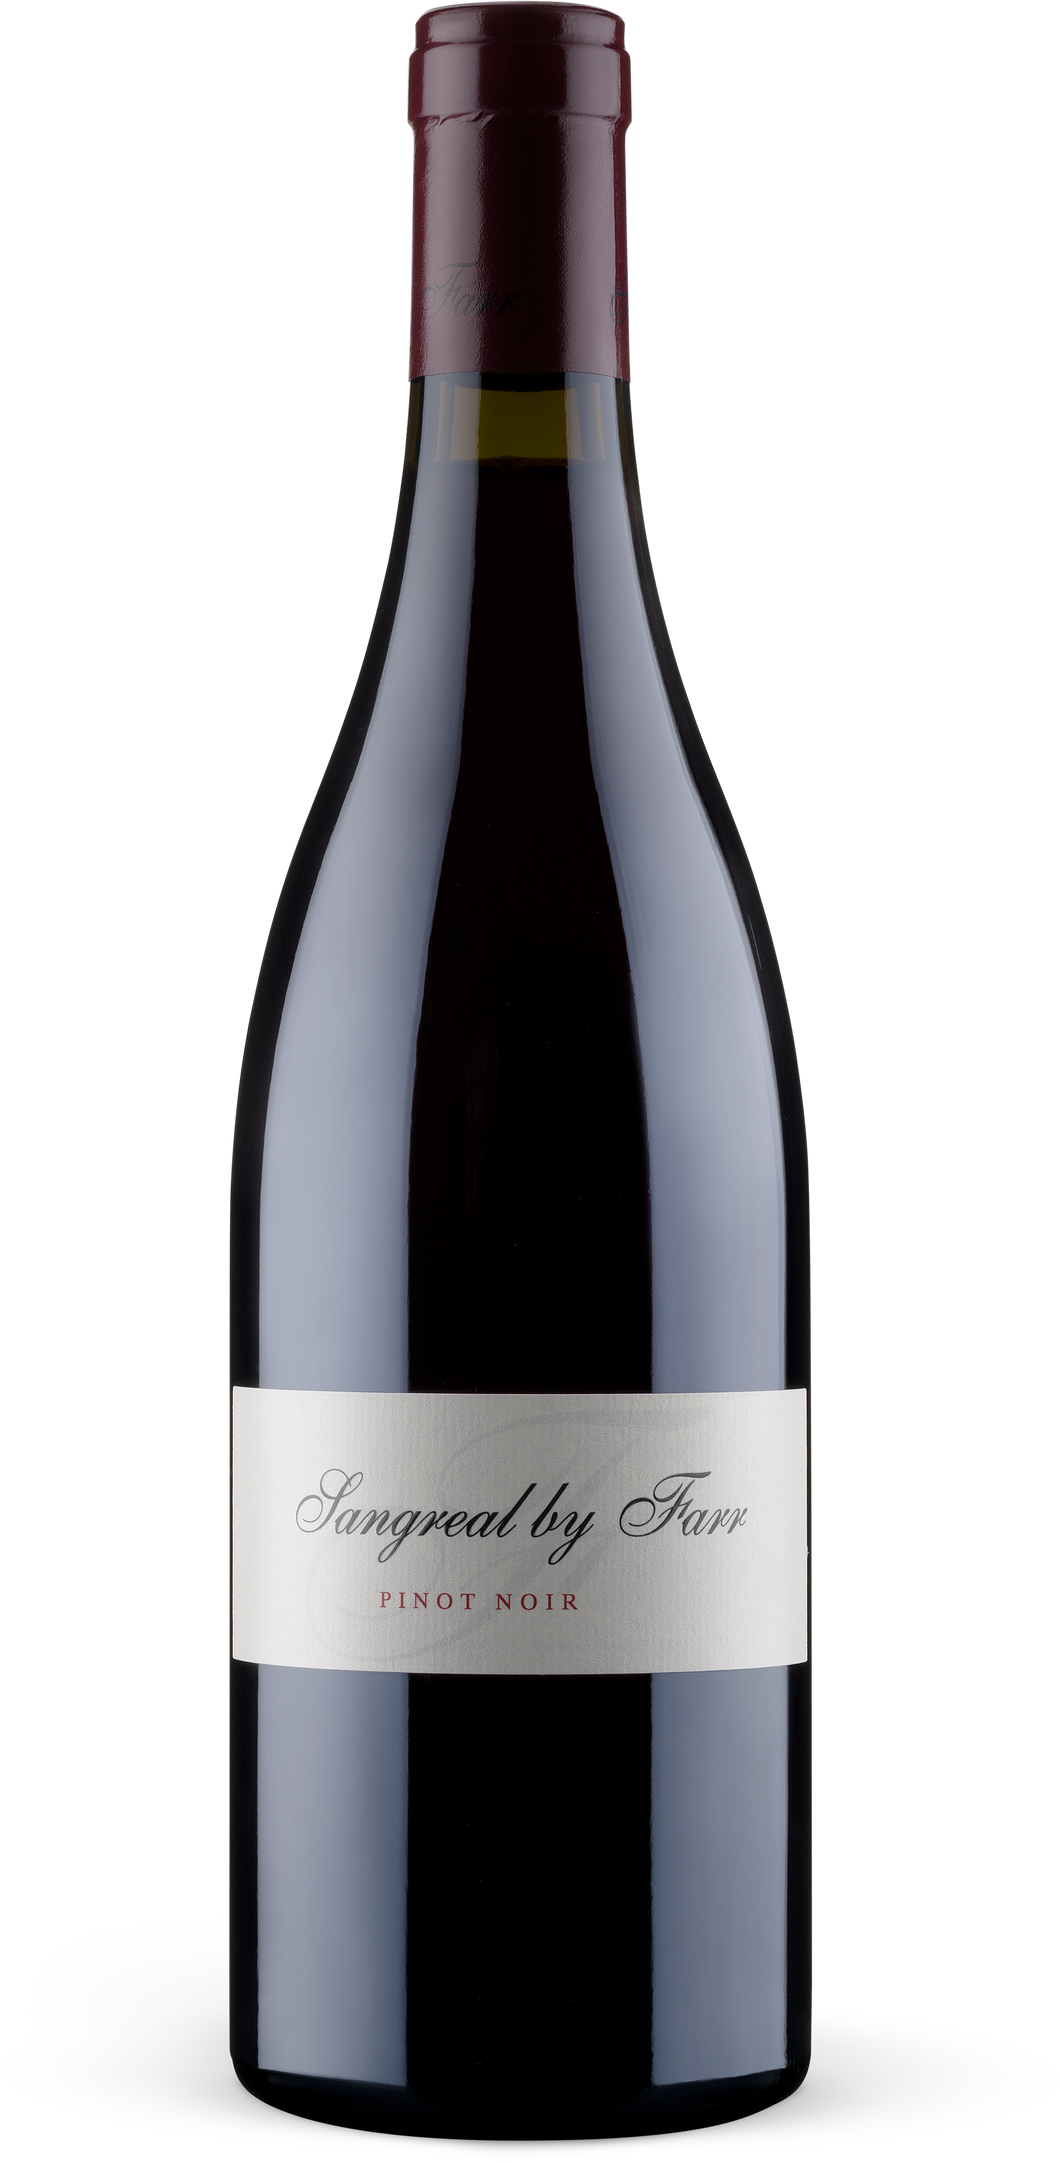 Sangreal by Farr Pinot Noir 2019 - iWine.sg